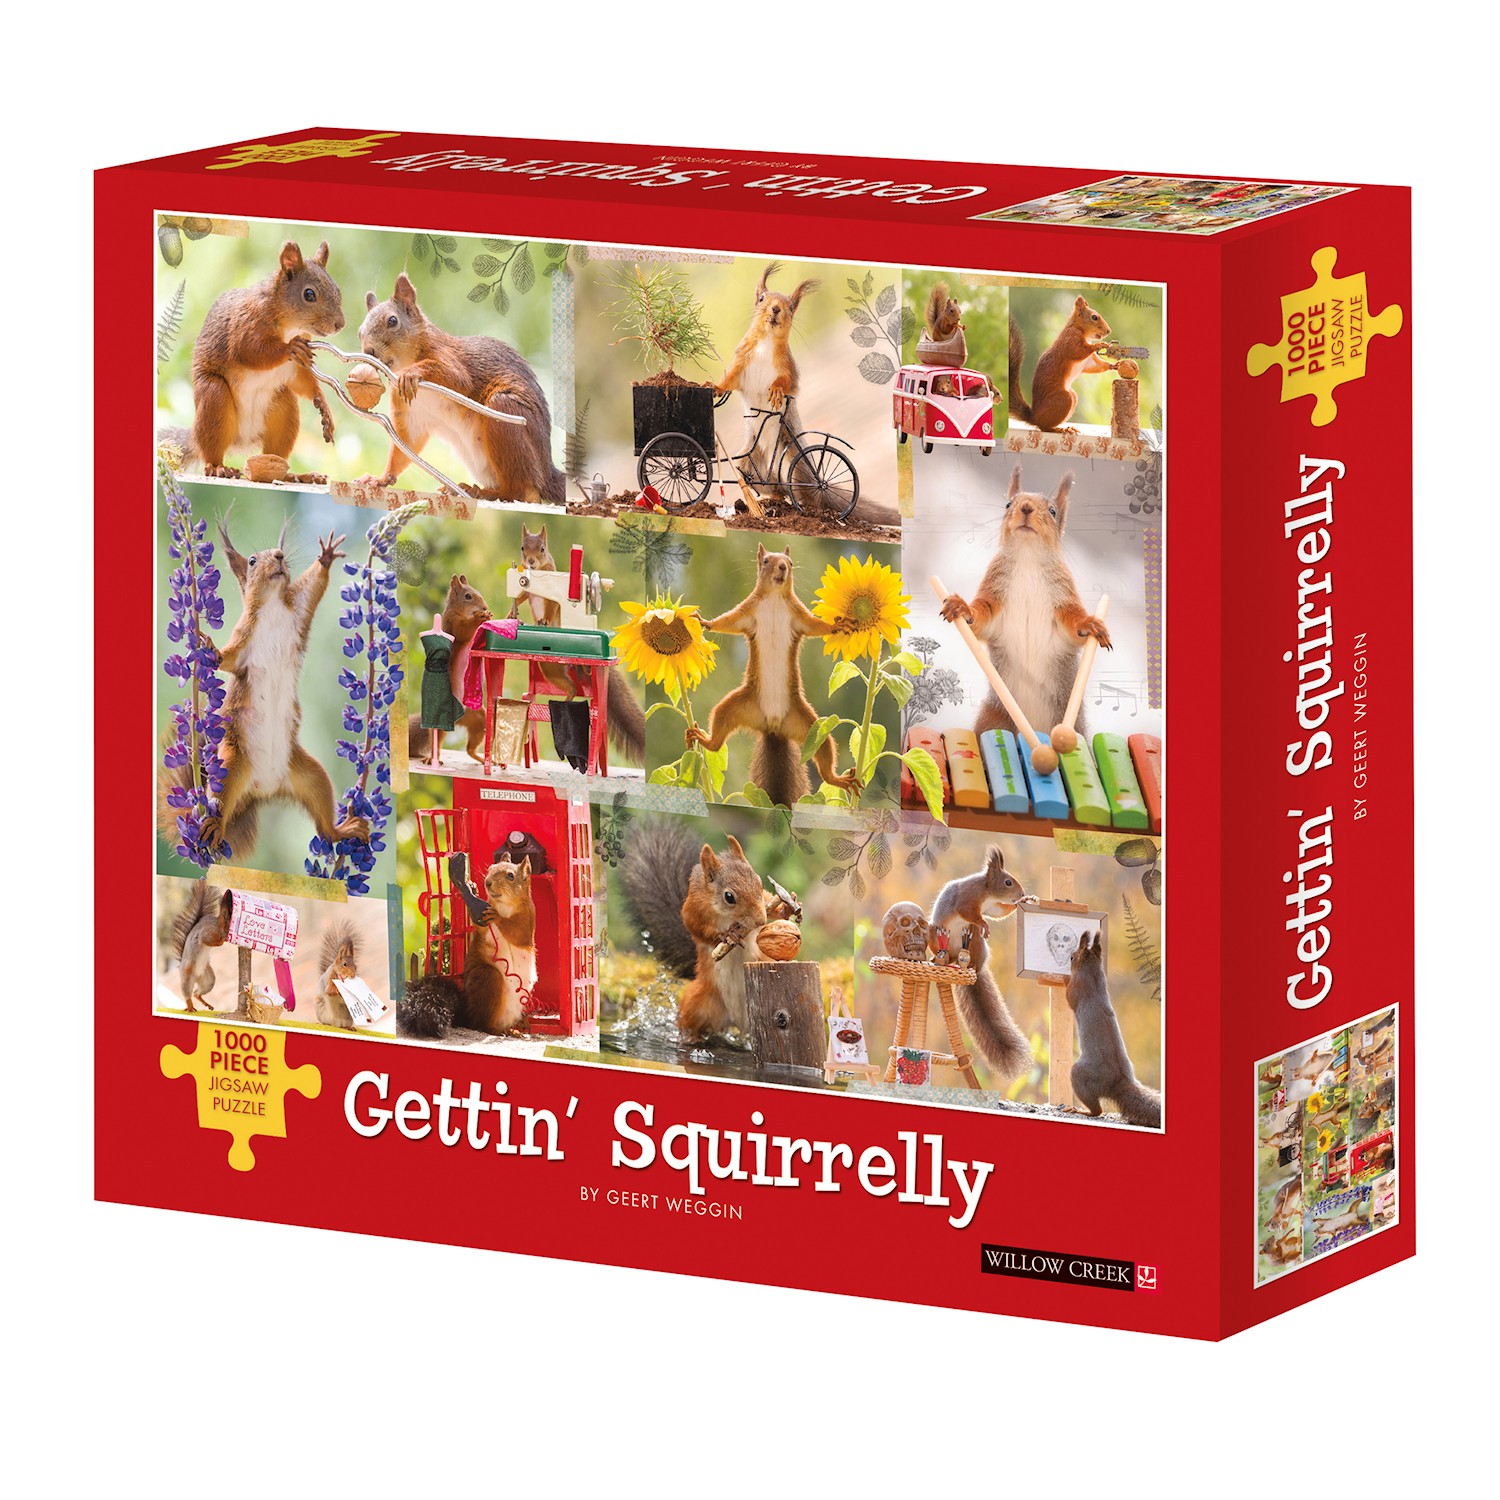 Getting' Squirrely 1000 Piece Puzzle What on Earth